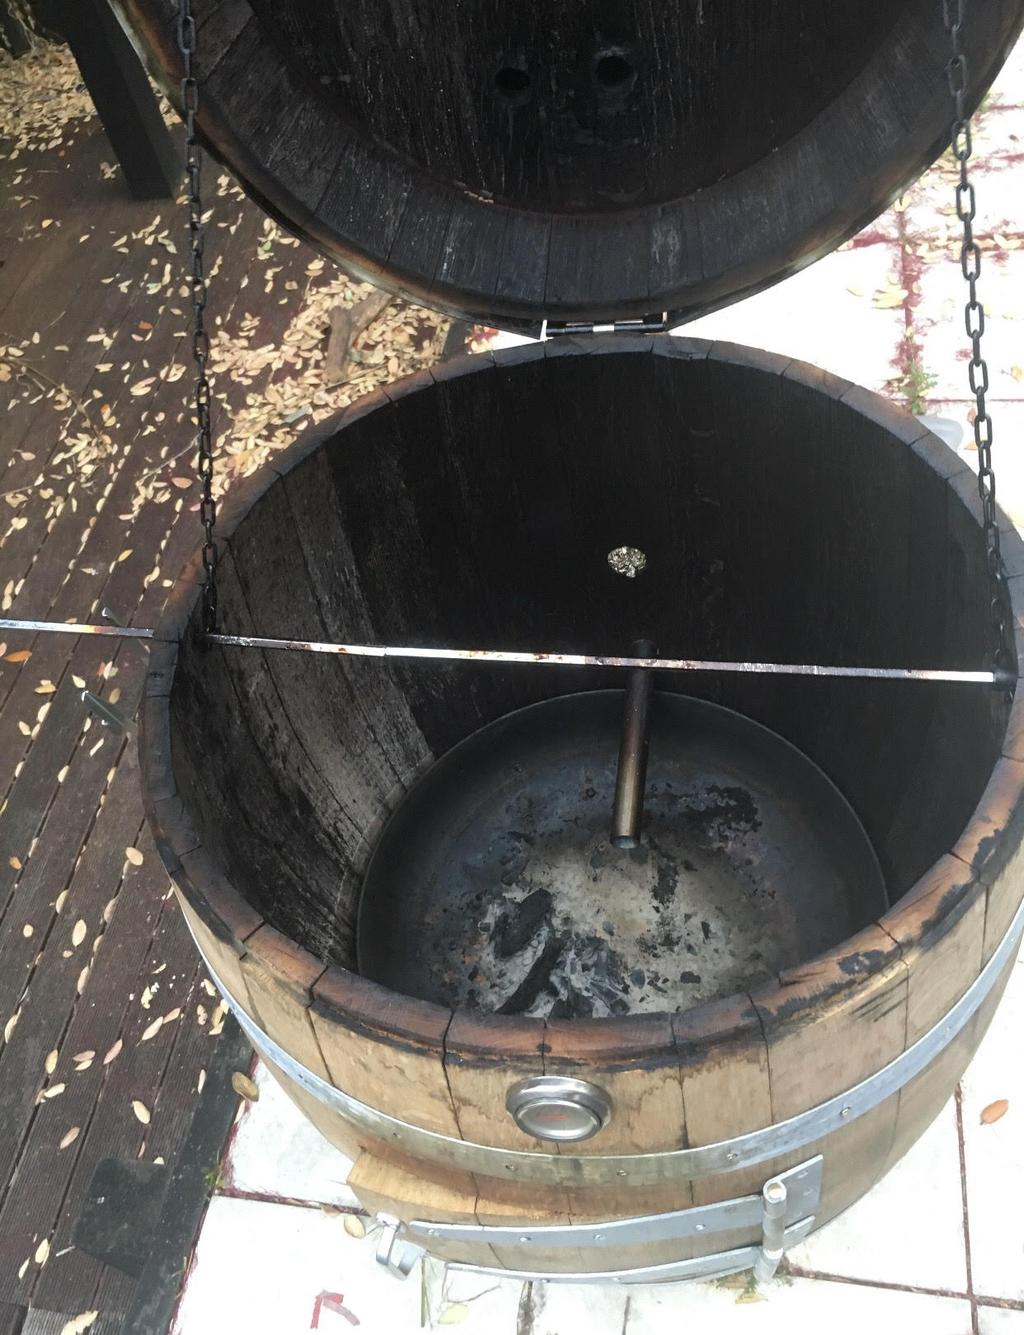 Make sure the rotisserie piece fits the barrel, if it is too long